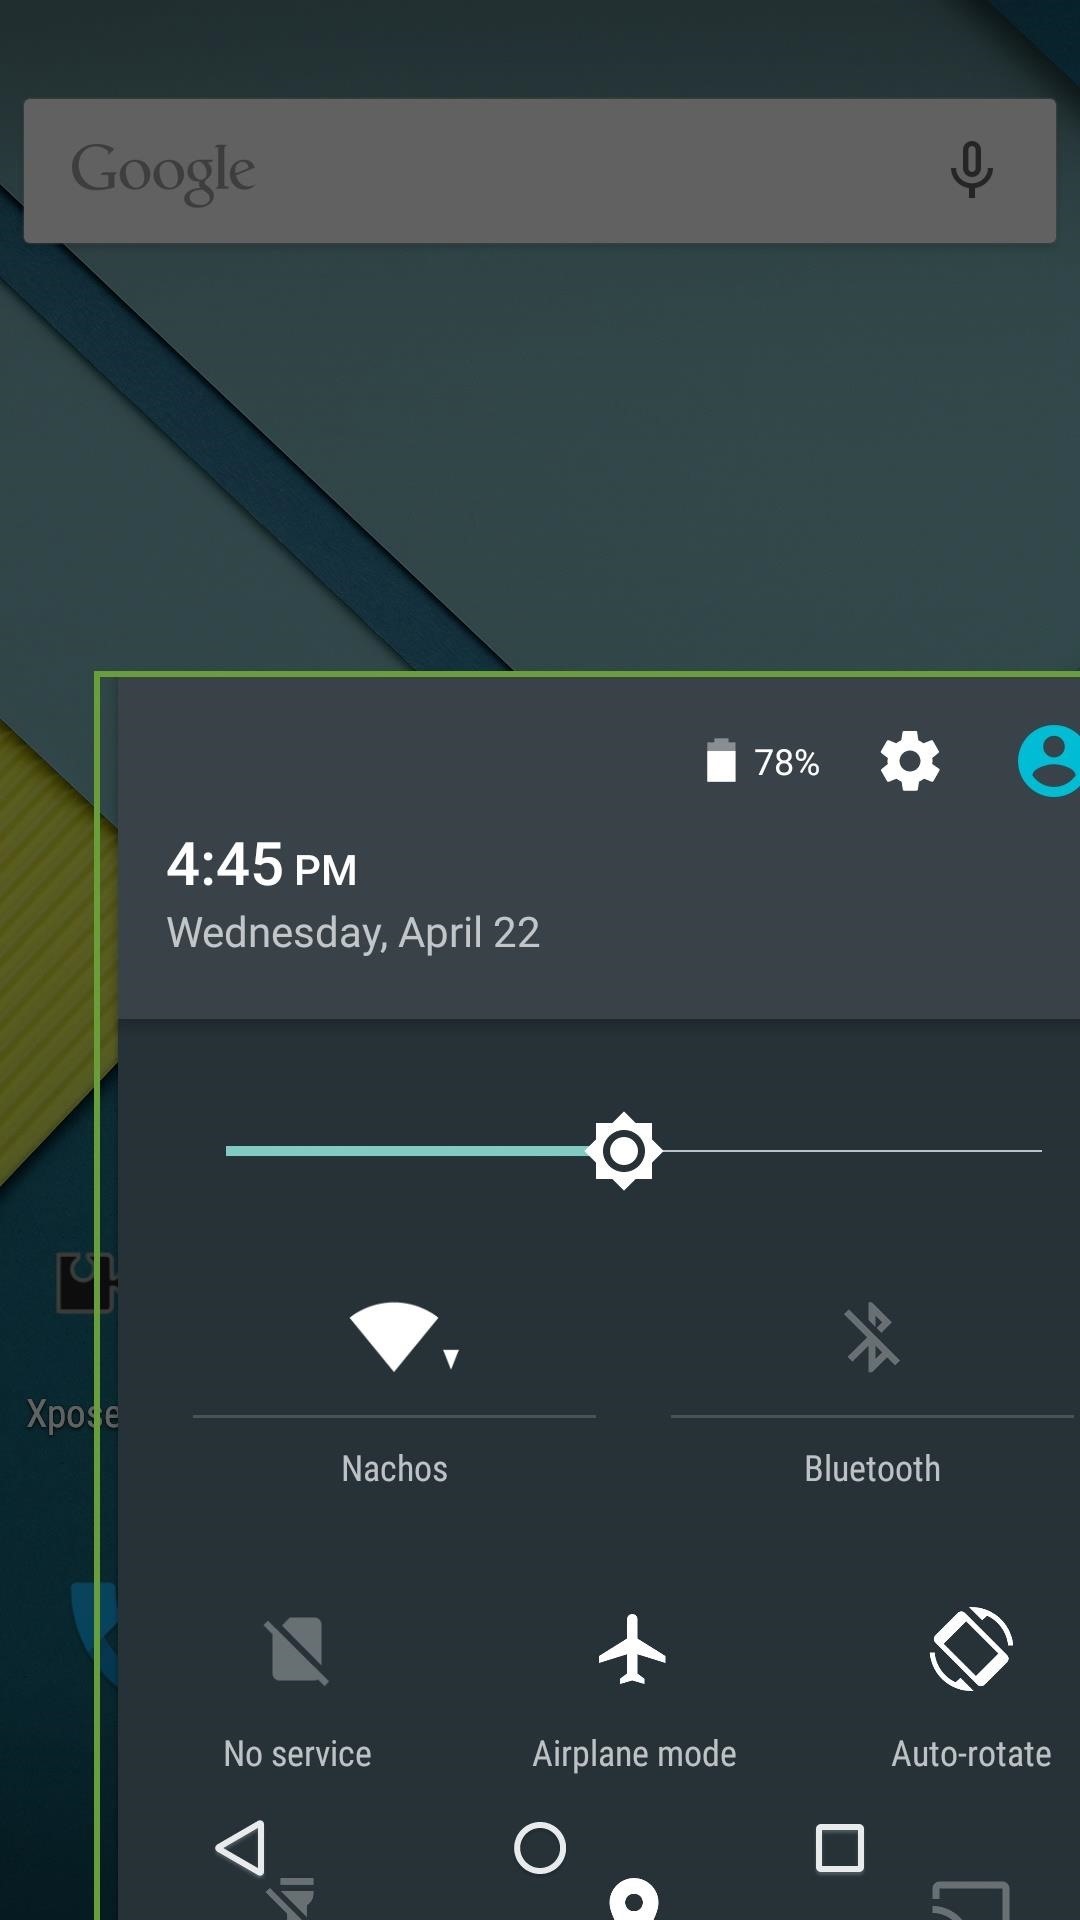 How to Move Any Screen Freely for Easier One-Handed Use on Android